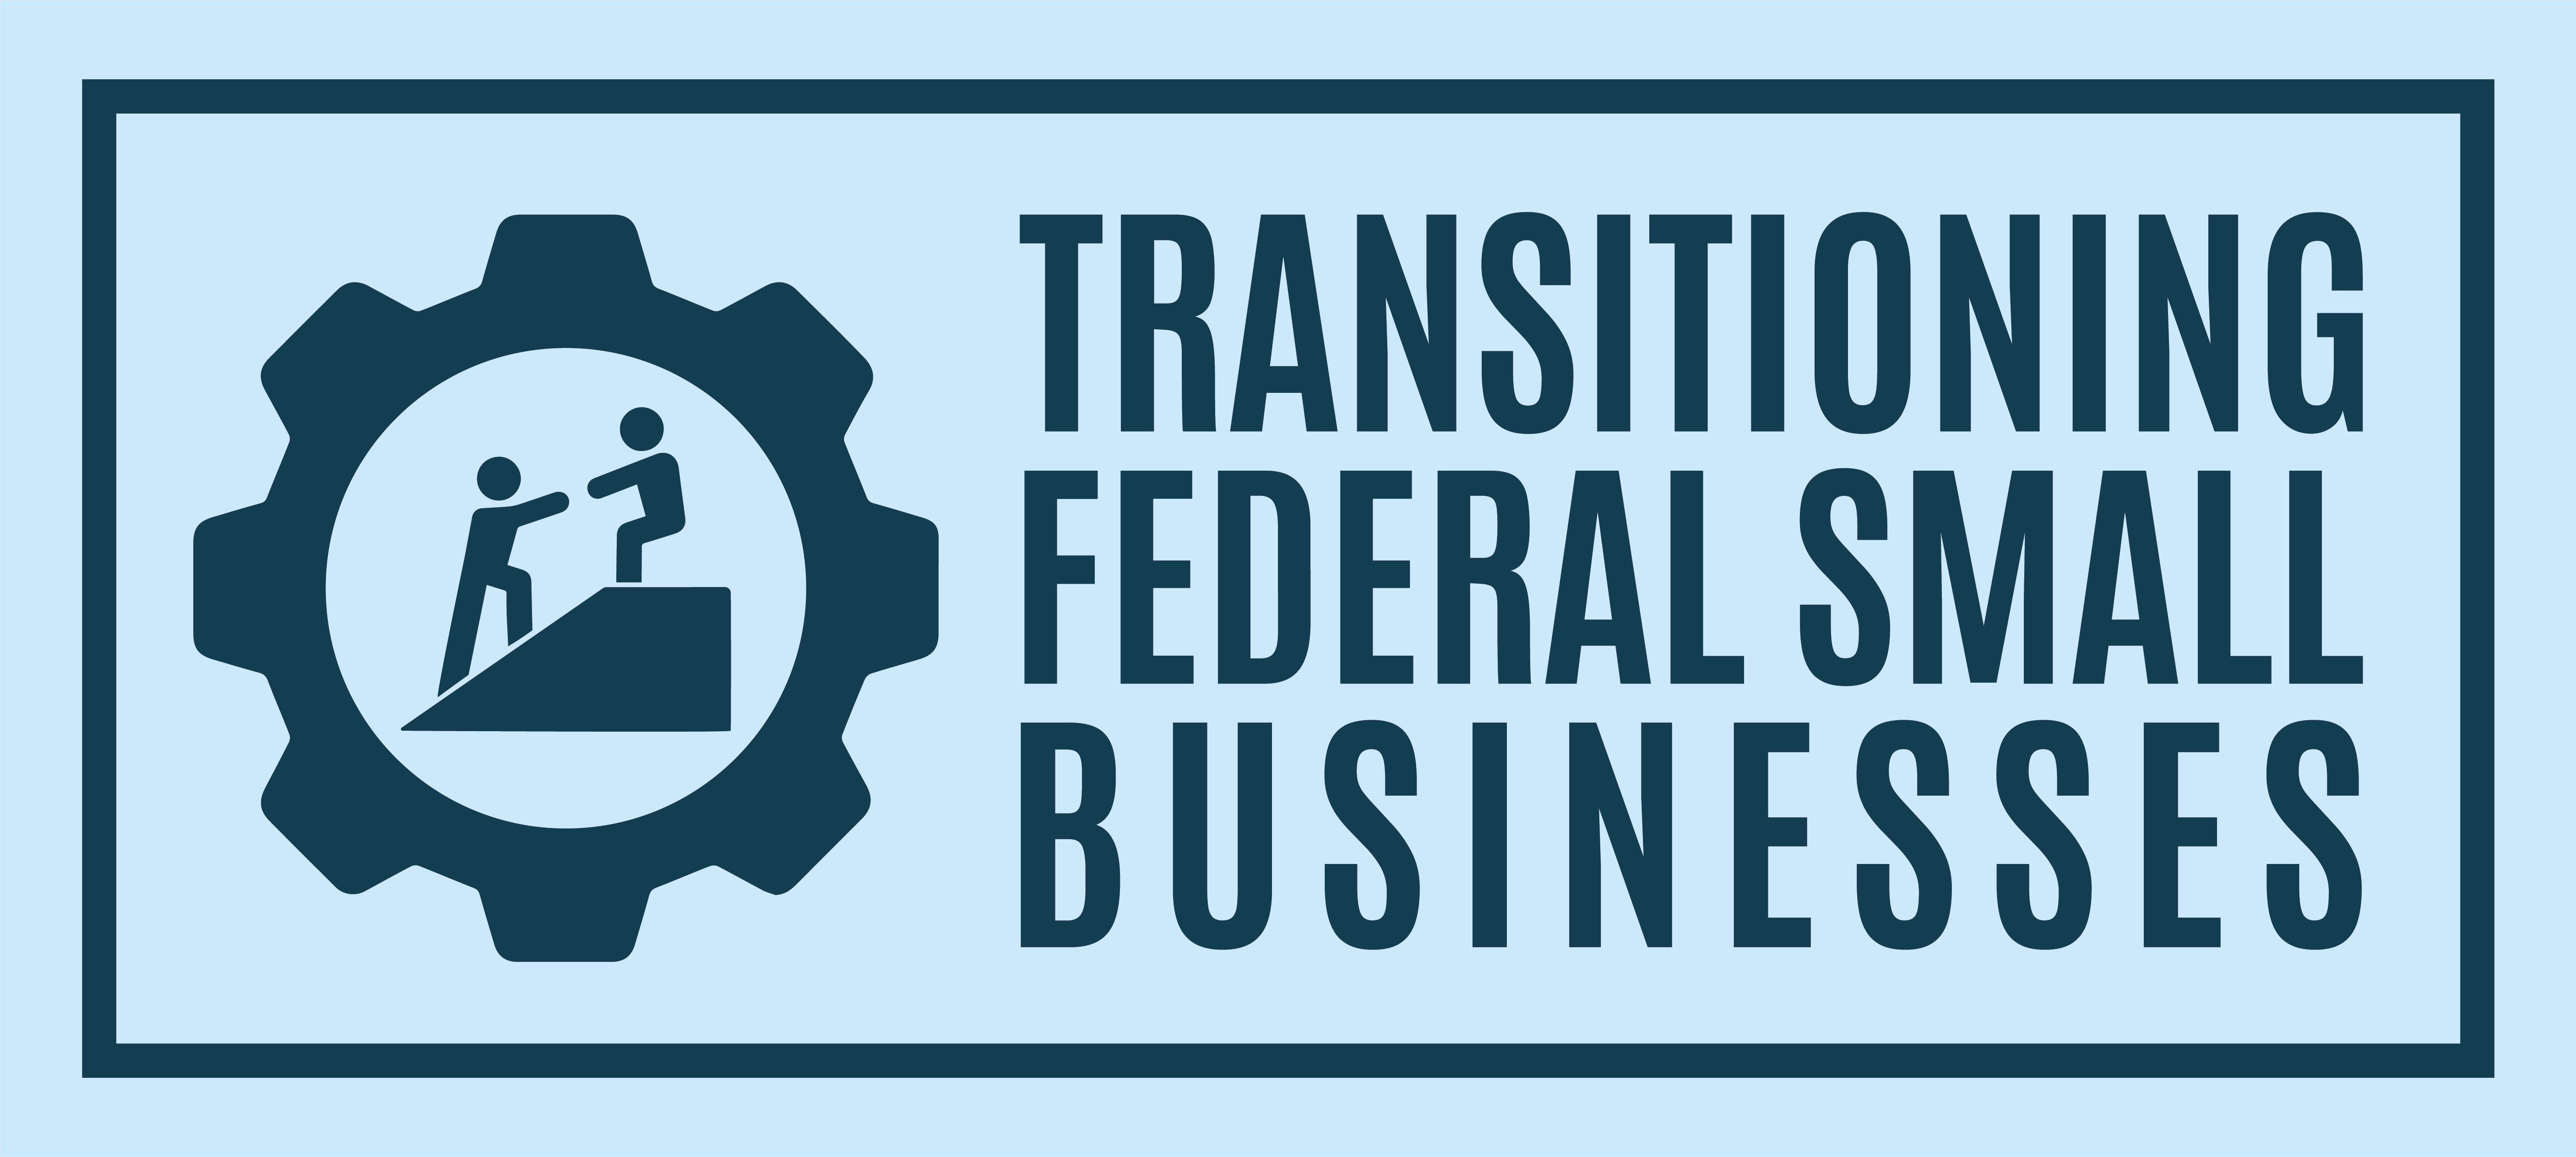 Transitioning Federal Small Businesses